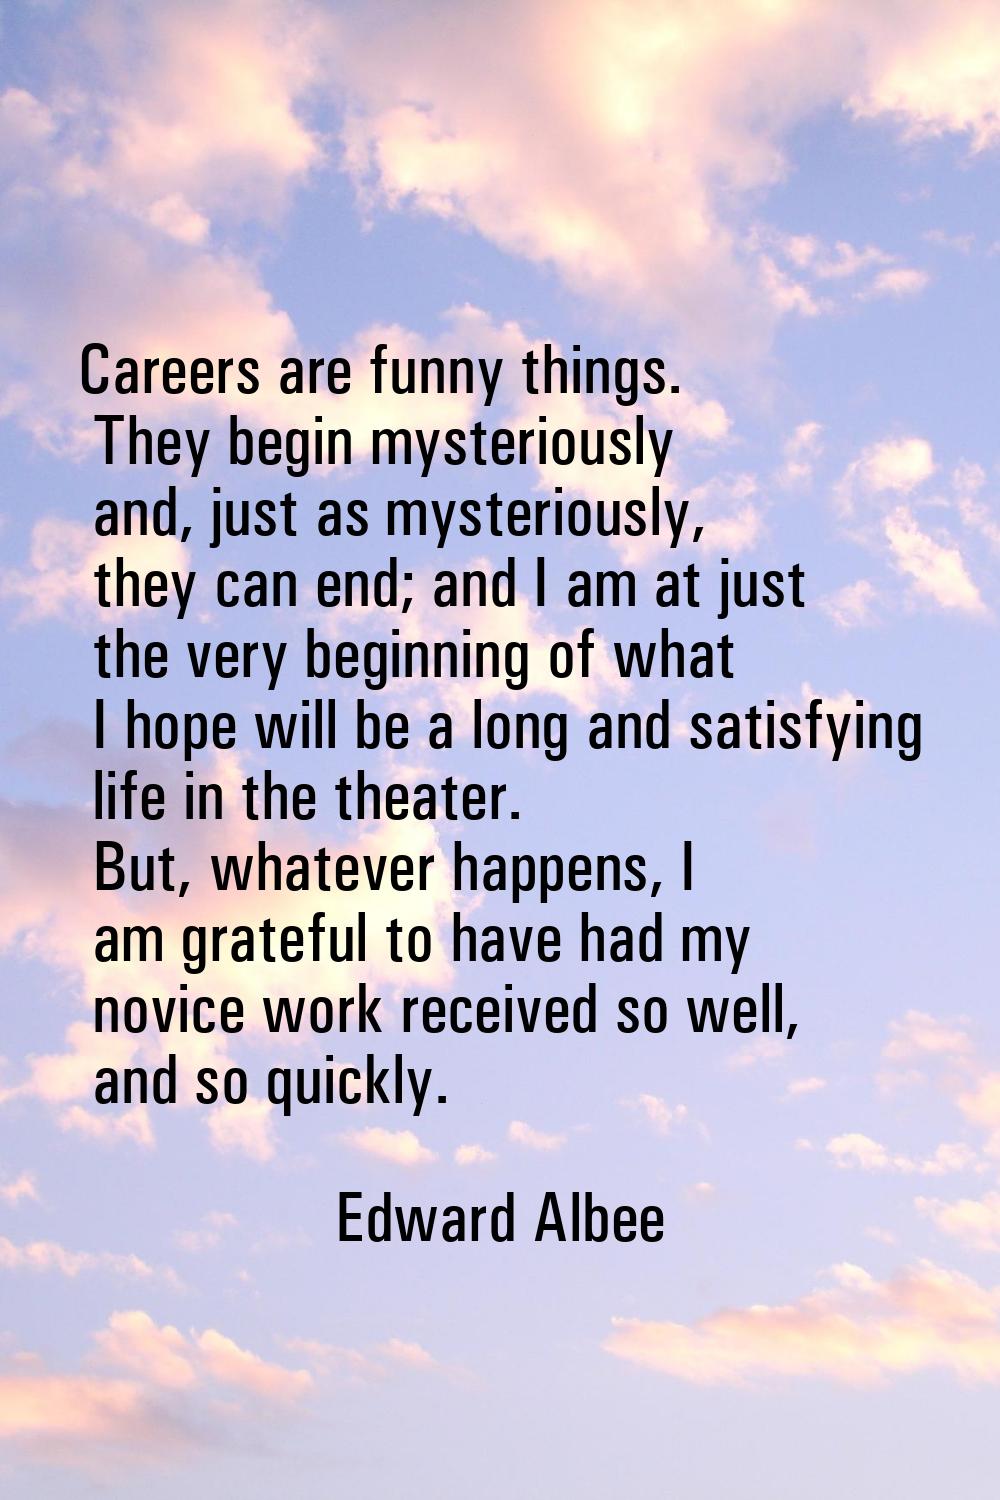 Careers are funny things. They begin mysteriously and, just as mysteriously, they can end; and I am